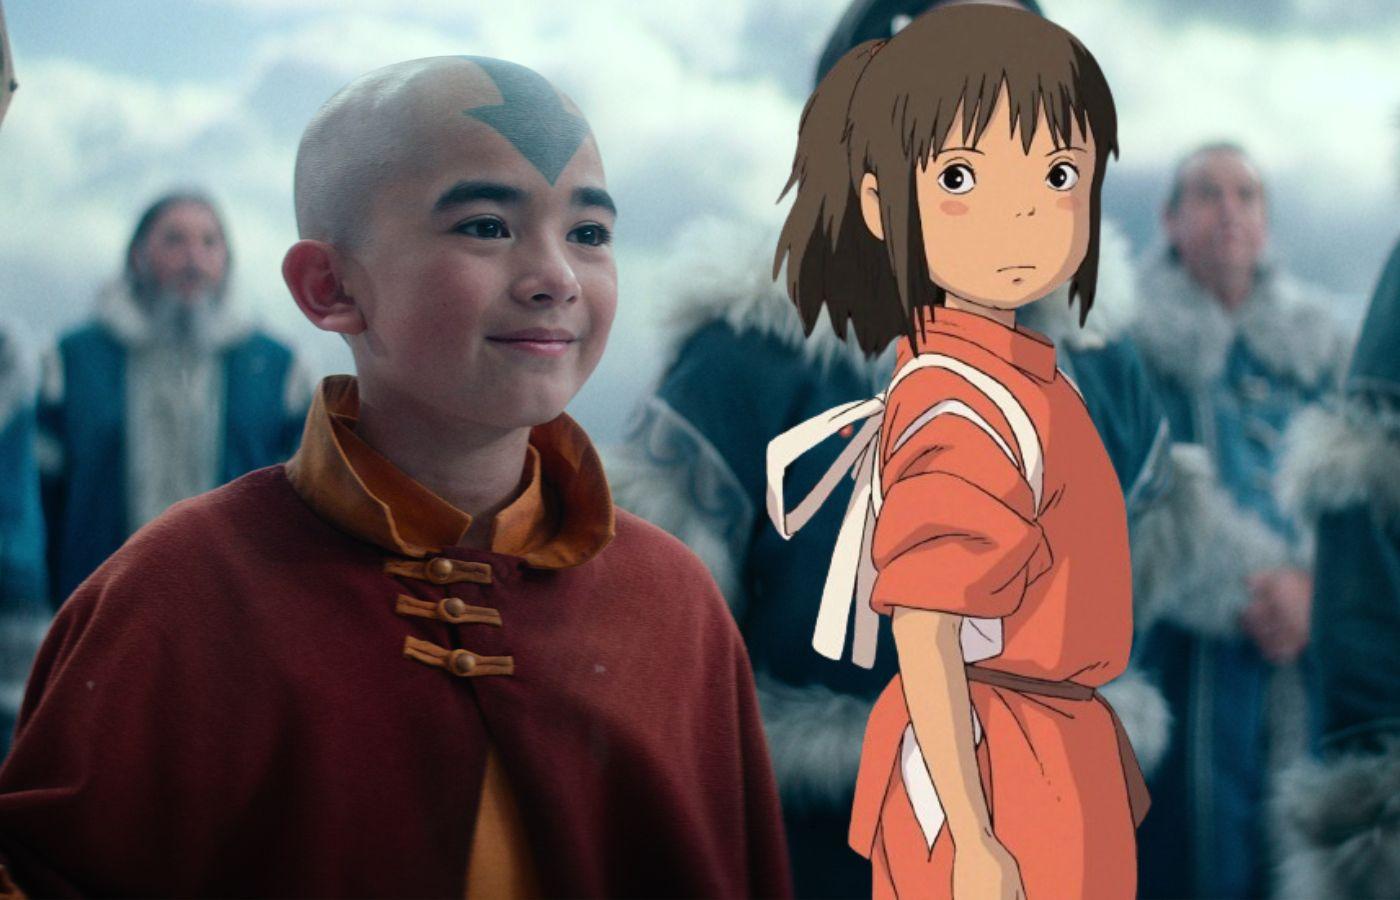 Aang in Avatar: The Last Airbender and Chihiro in Spirited Away